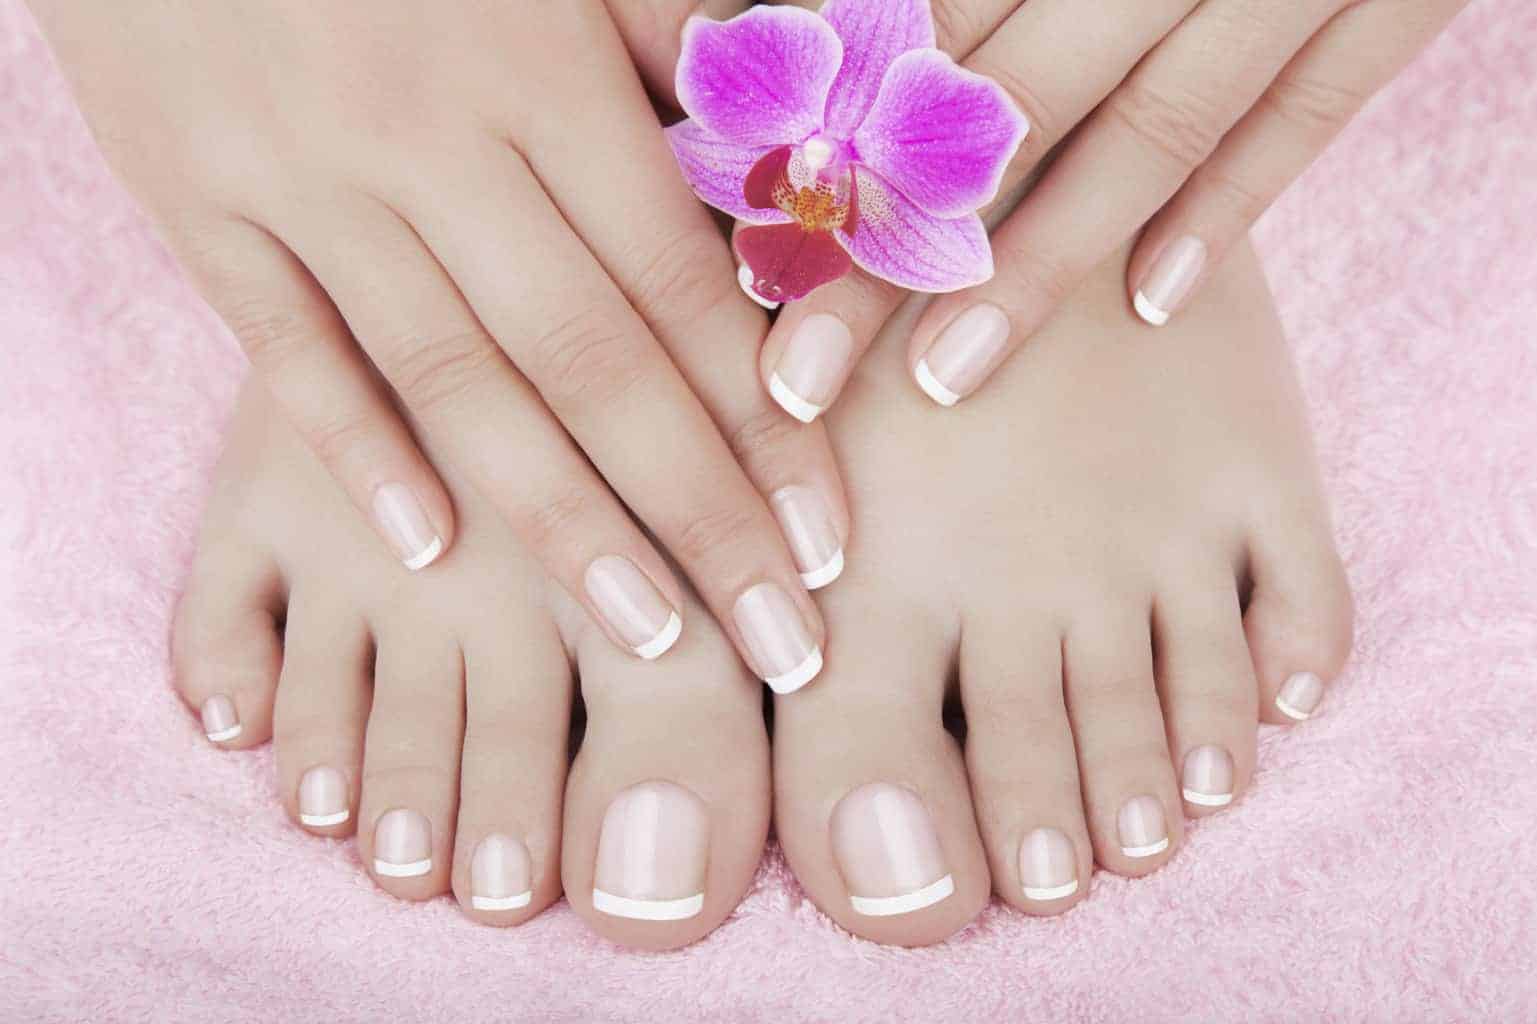 How To Do Pedicure At Home: 5 Steps to Beautiful Feet